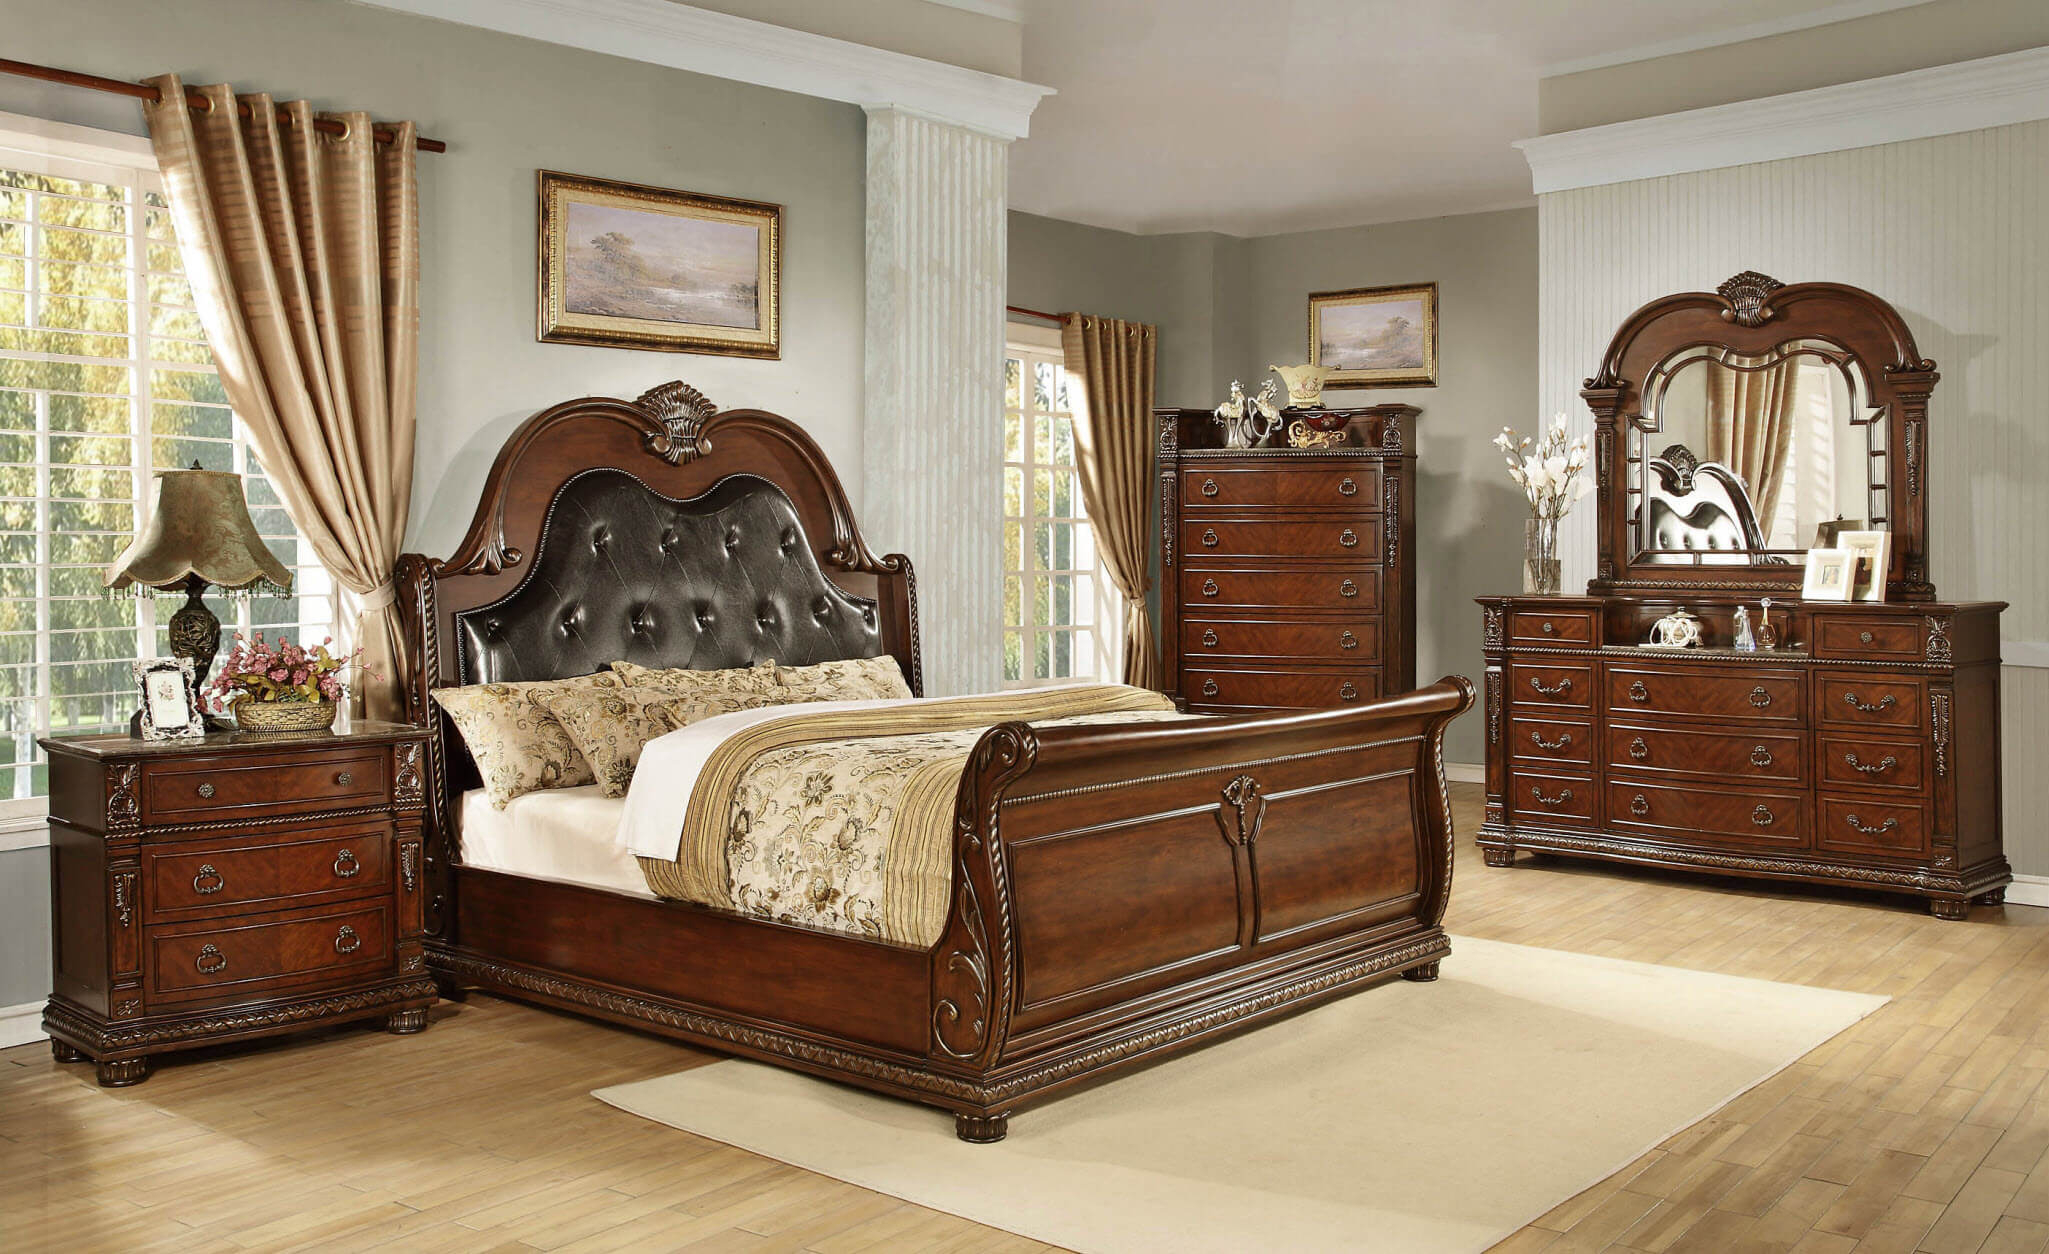 B718 Palace Marble Top Bedroom Set Global Trading pertaining to size 2049 X 1254